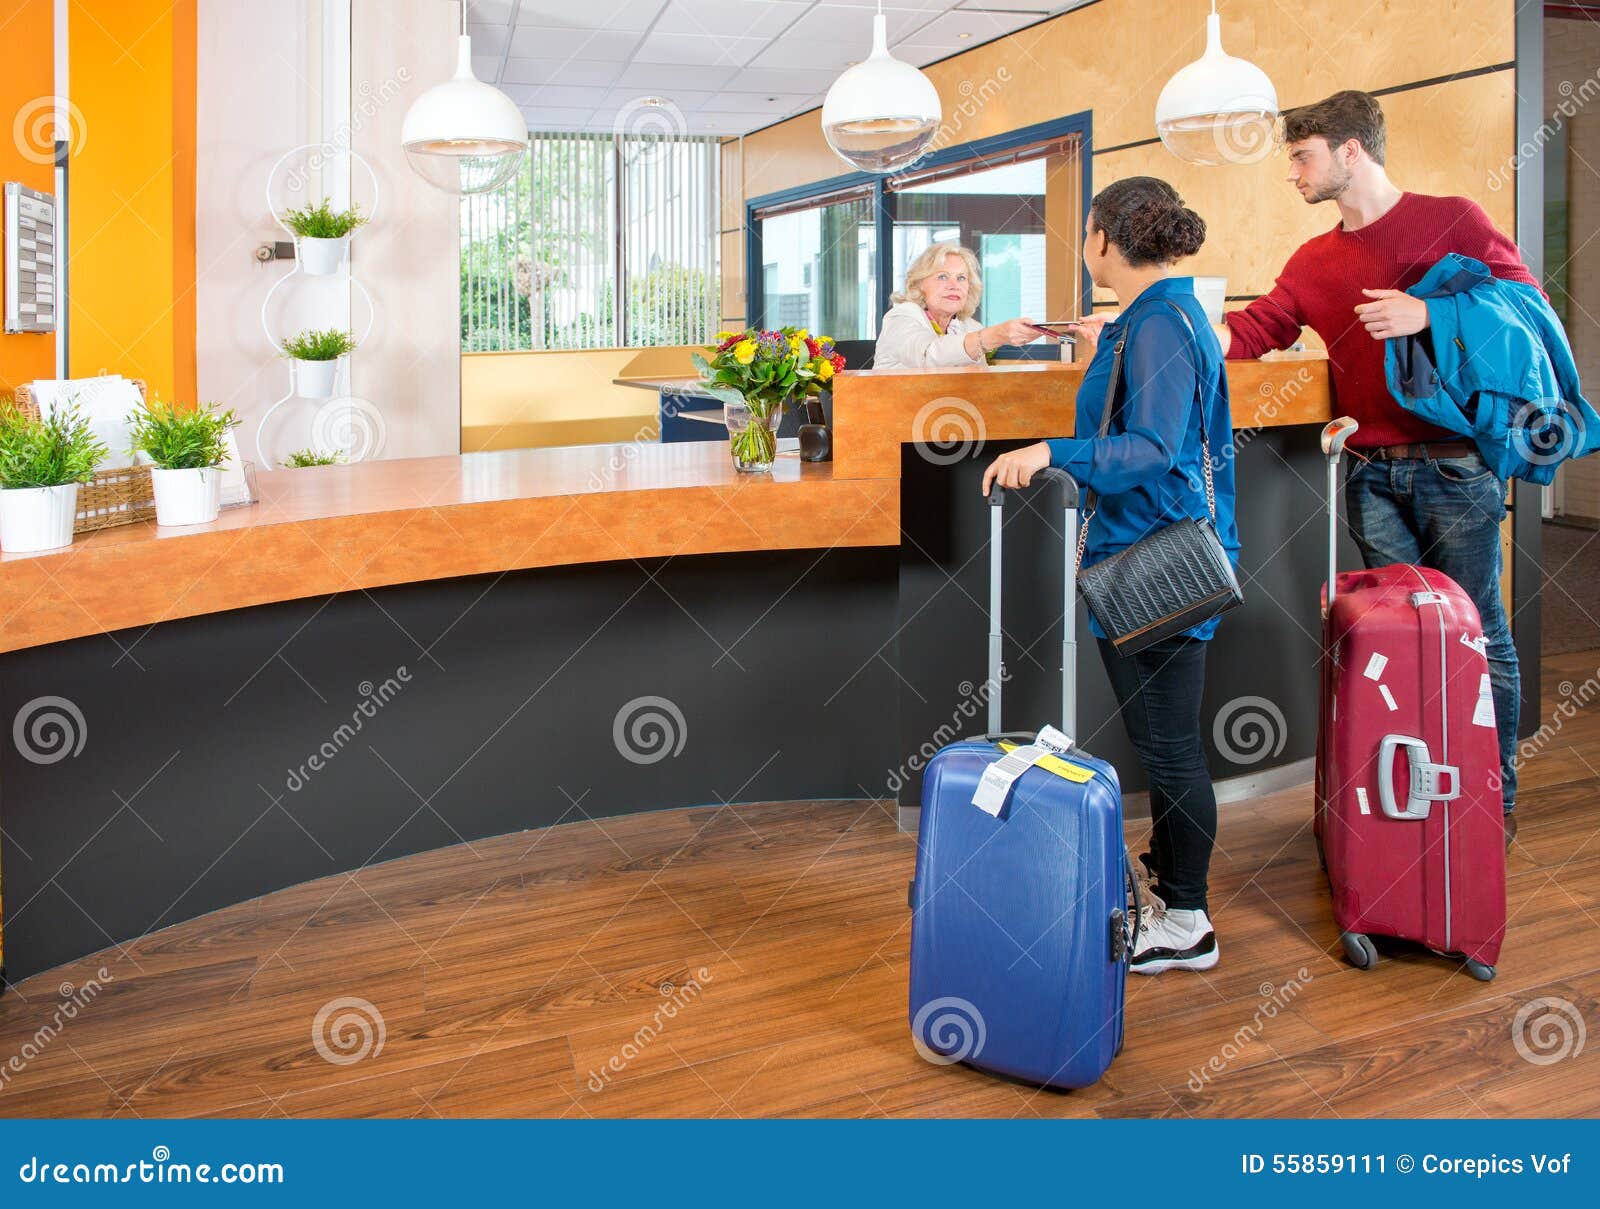 young travelers at hotel check in